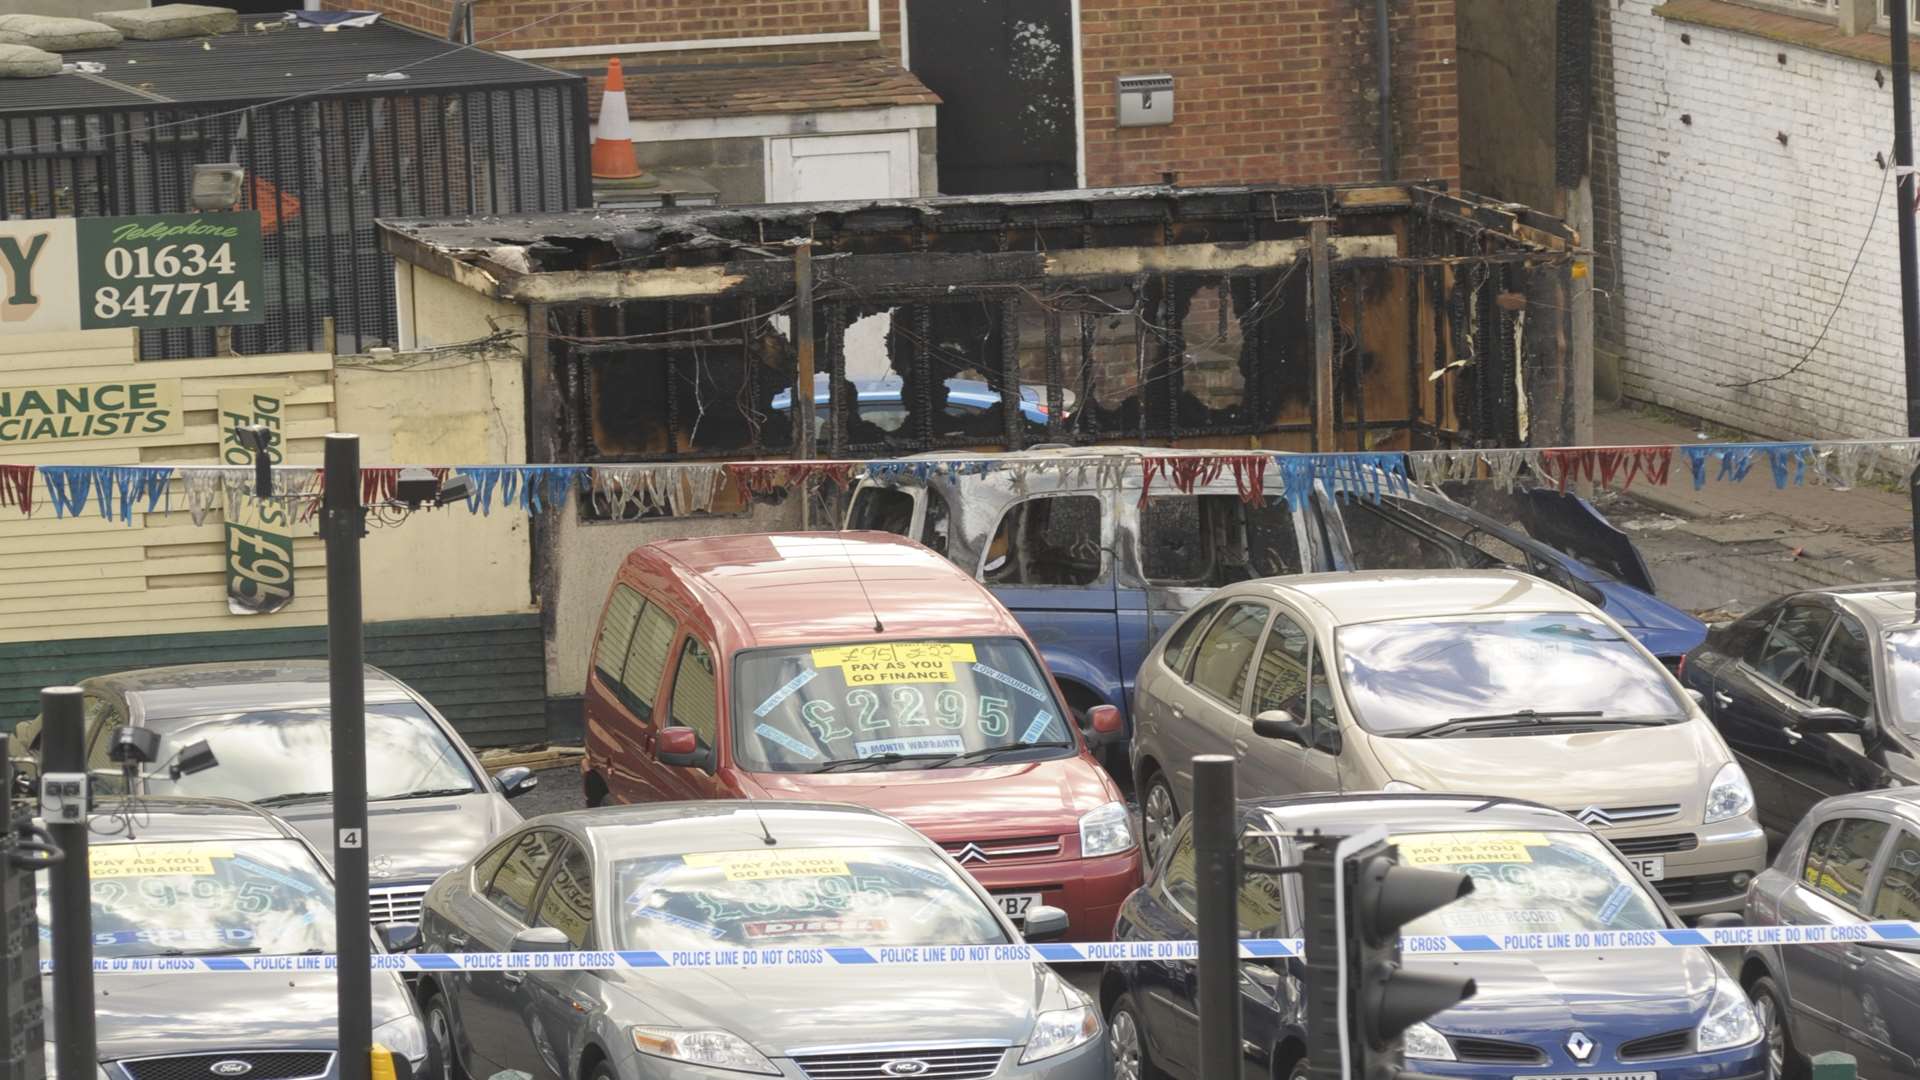 The arson attack was at the Regency Motor Company in Chatham